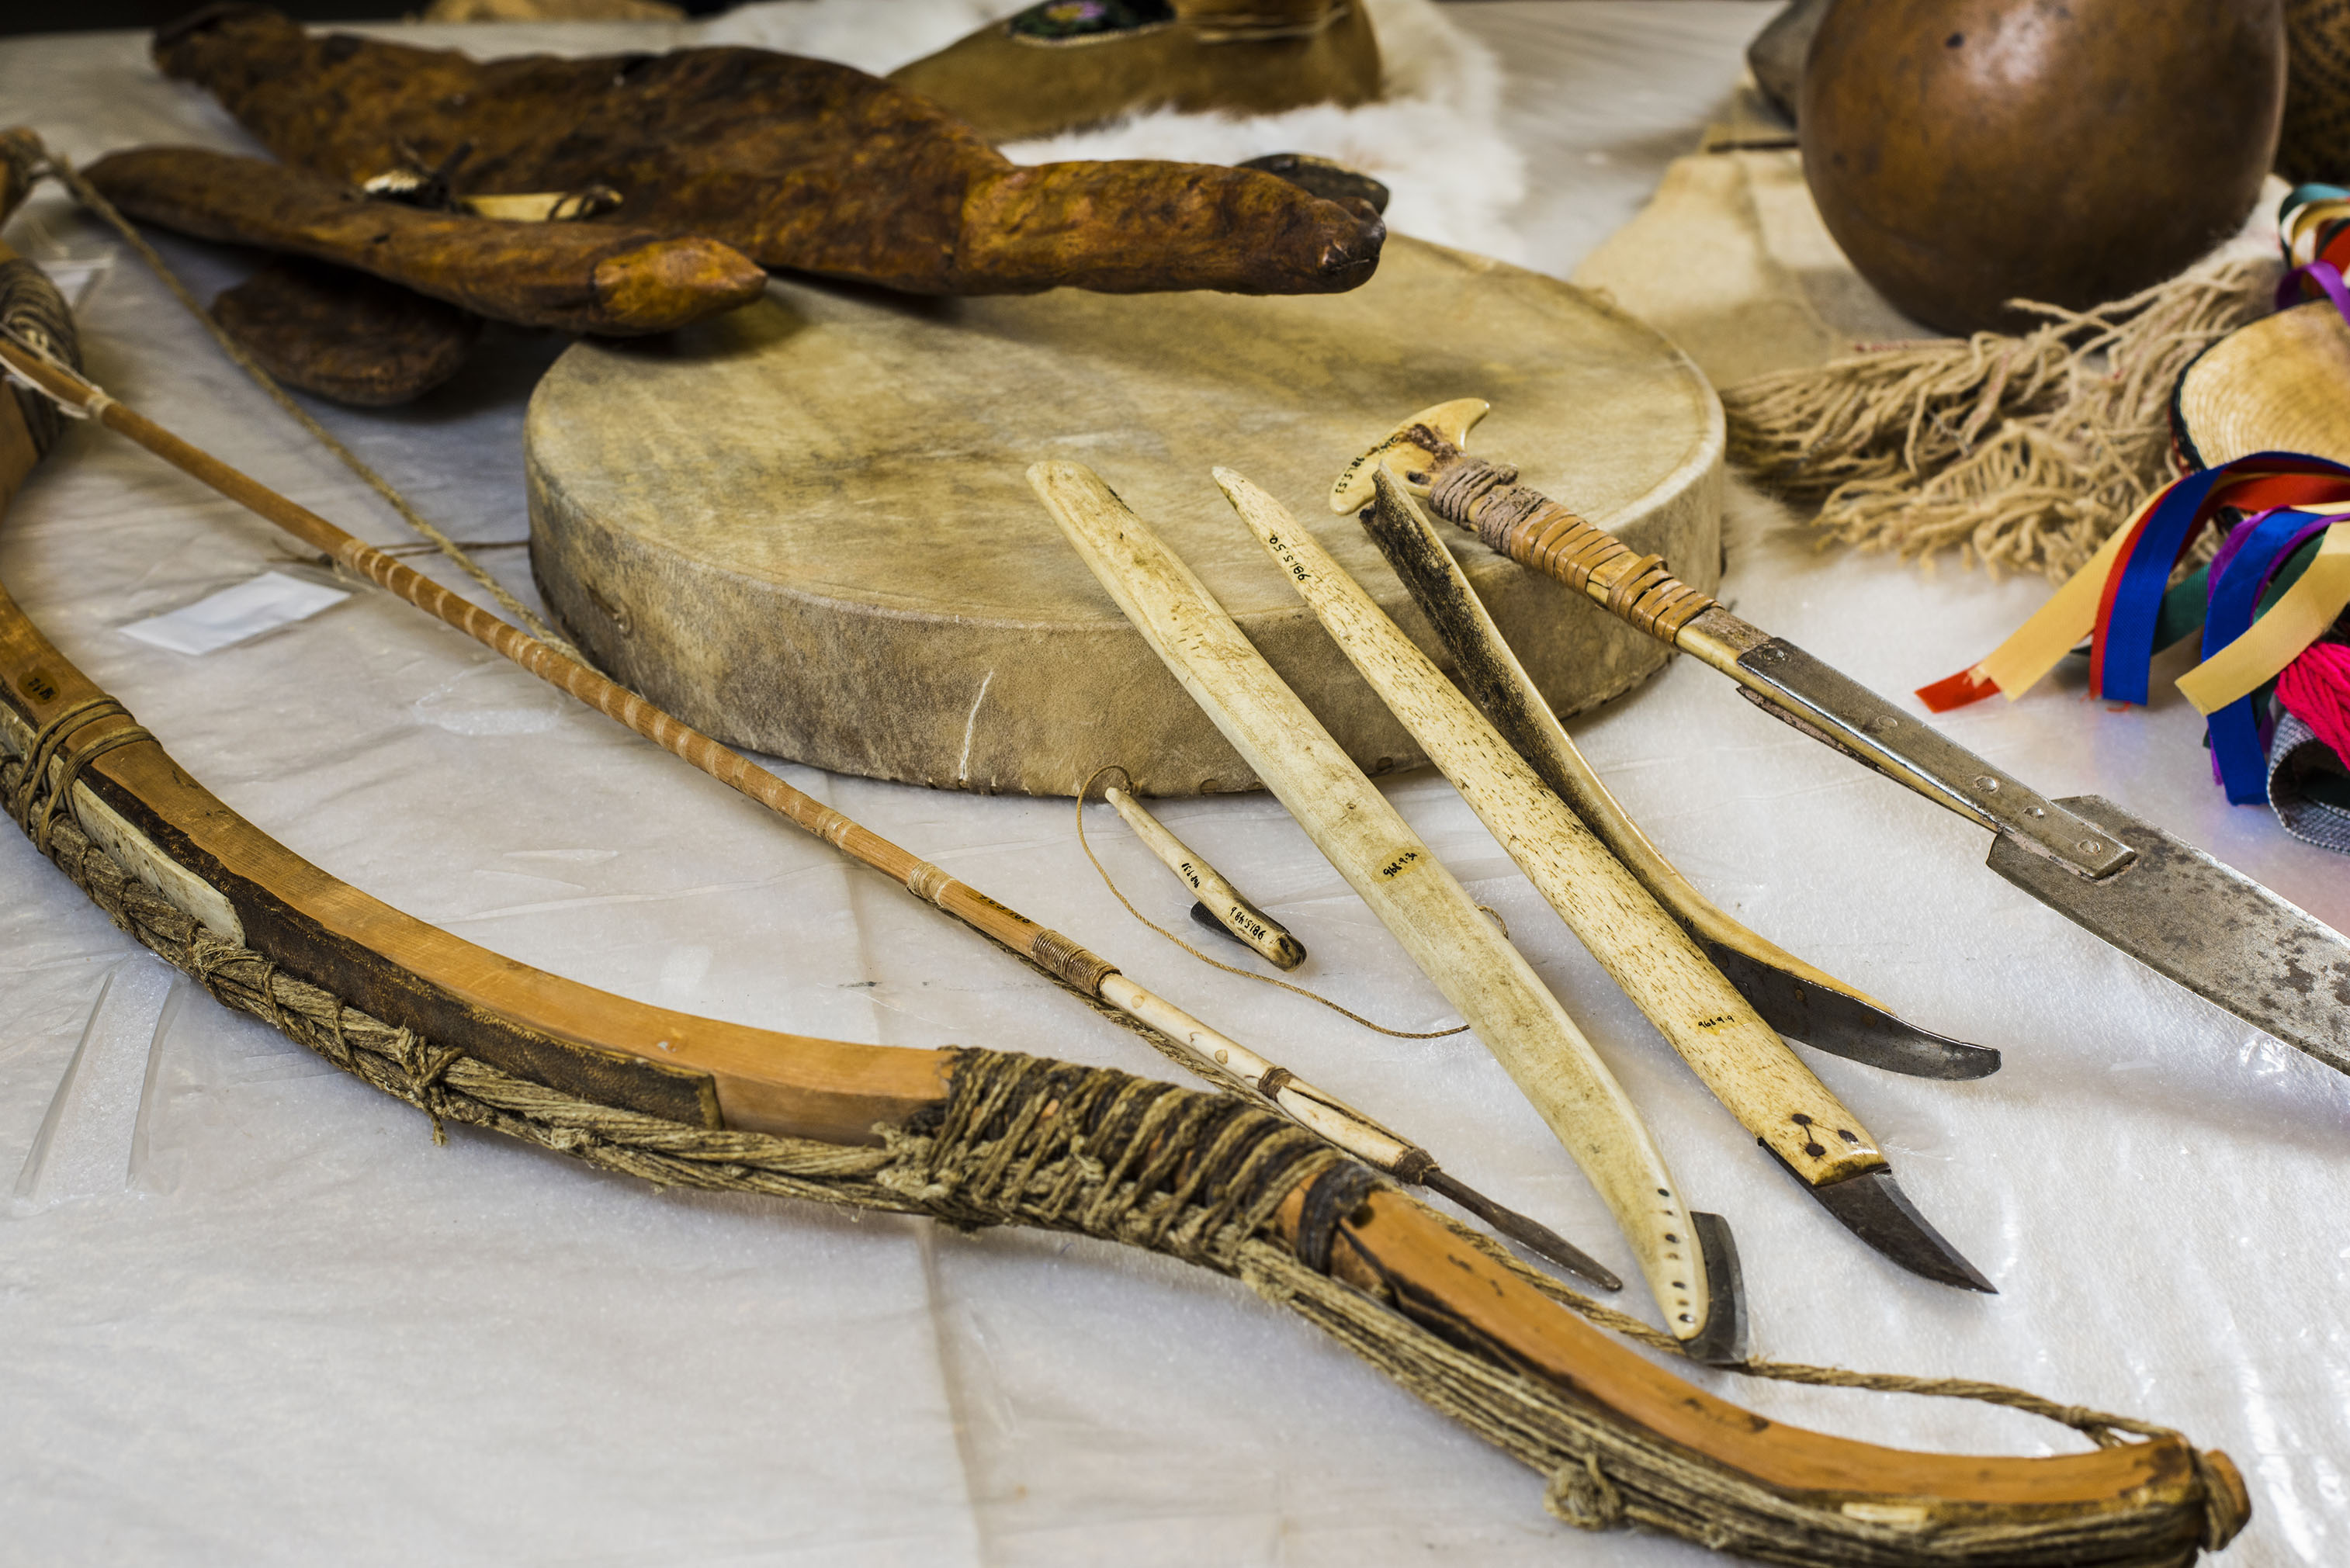 Artifacts on a covered table, including a bow, a round hand drum, and a sharp metal tool with a covered handle.